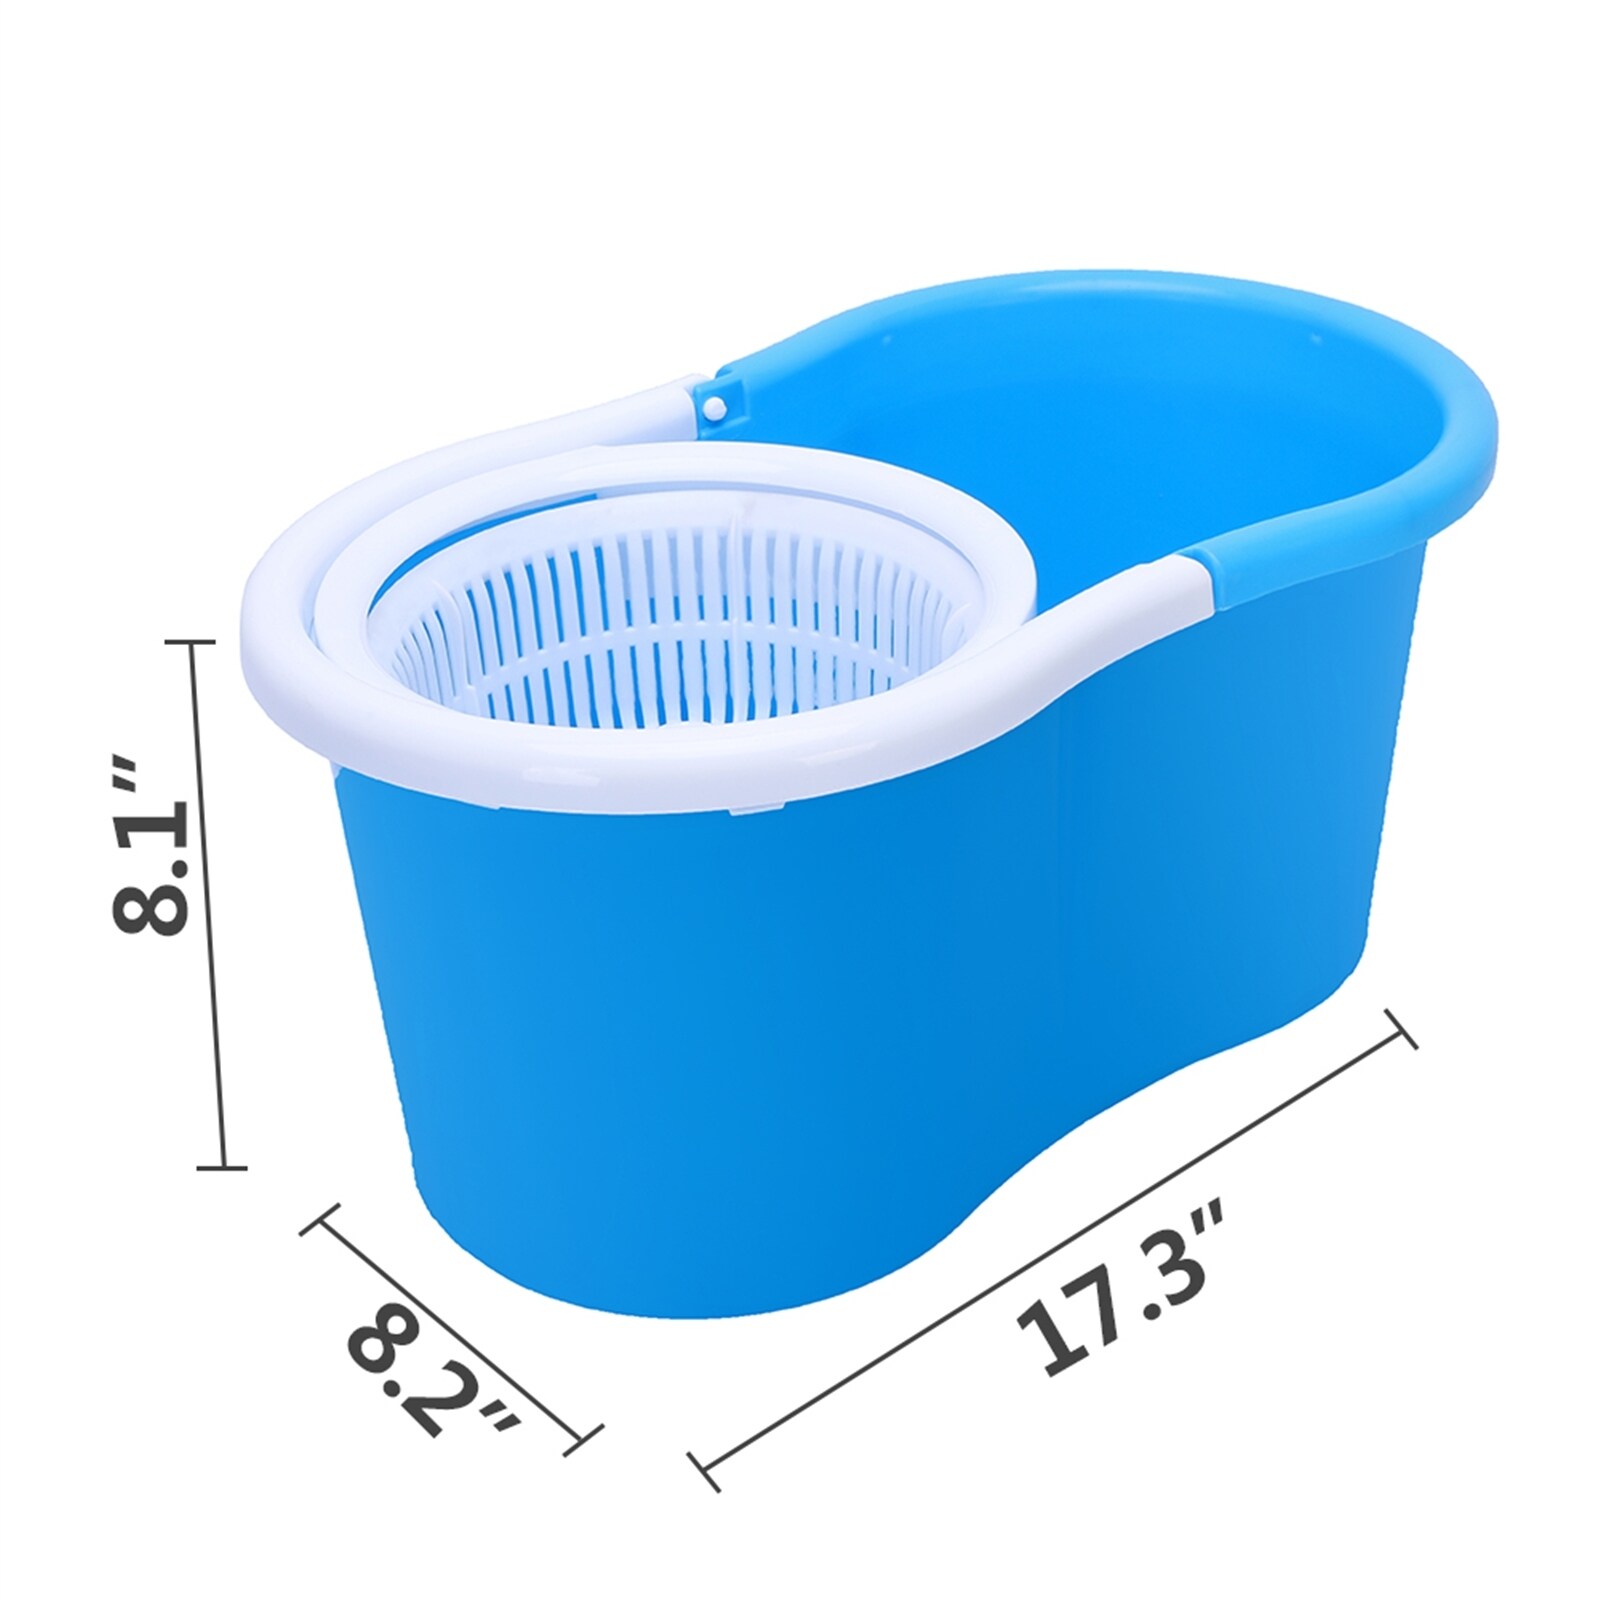 https://ak1.ostkcdn.com/images/products/is/images/direct/6c55d8346b6dd028e34e4574d36666fba0ed29cf/360%C2%B0-Spin-Mop-with-Bucket-%26-Dual-Mop-Heads.jpg